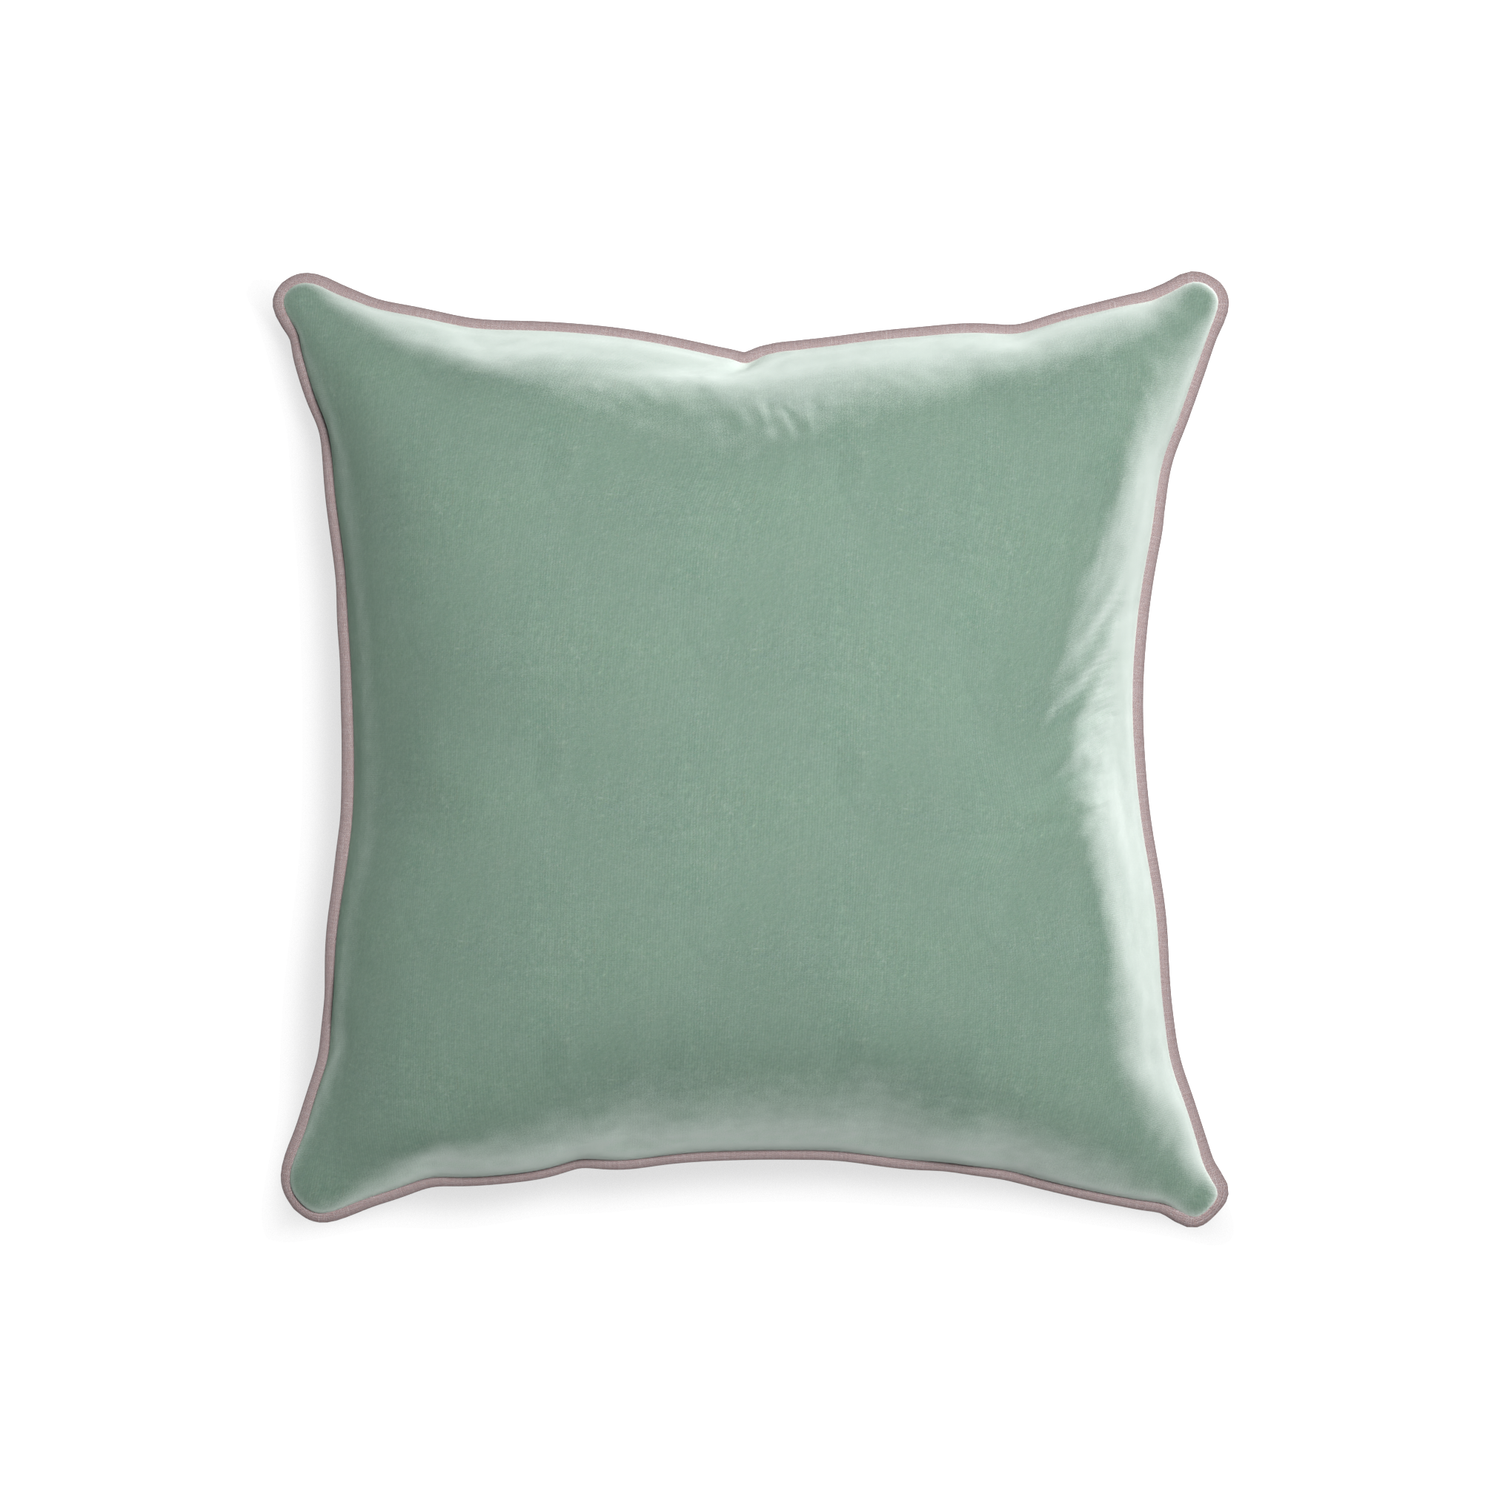 20-square sea salt velvet custom blue greenpillow with orchid piping on white background